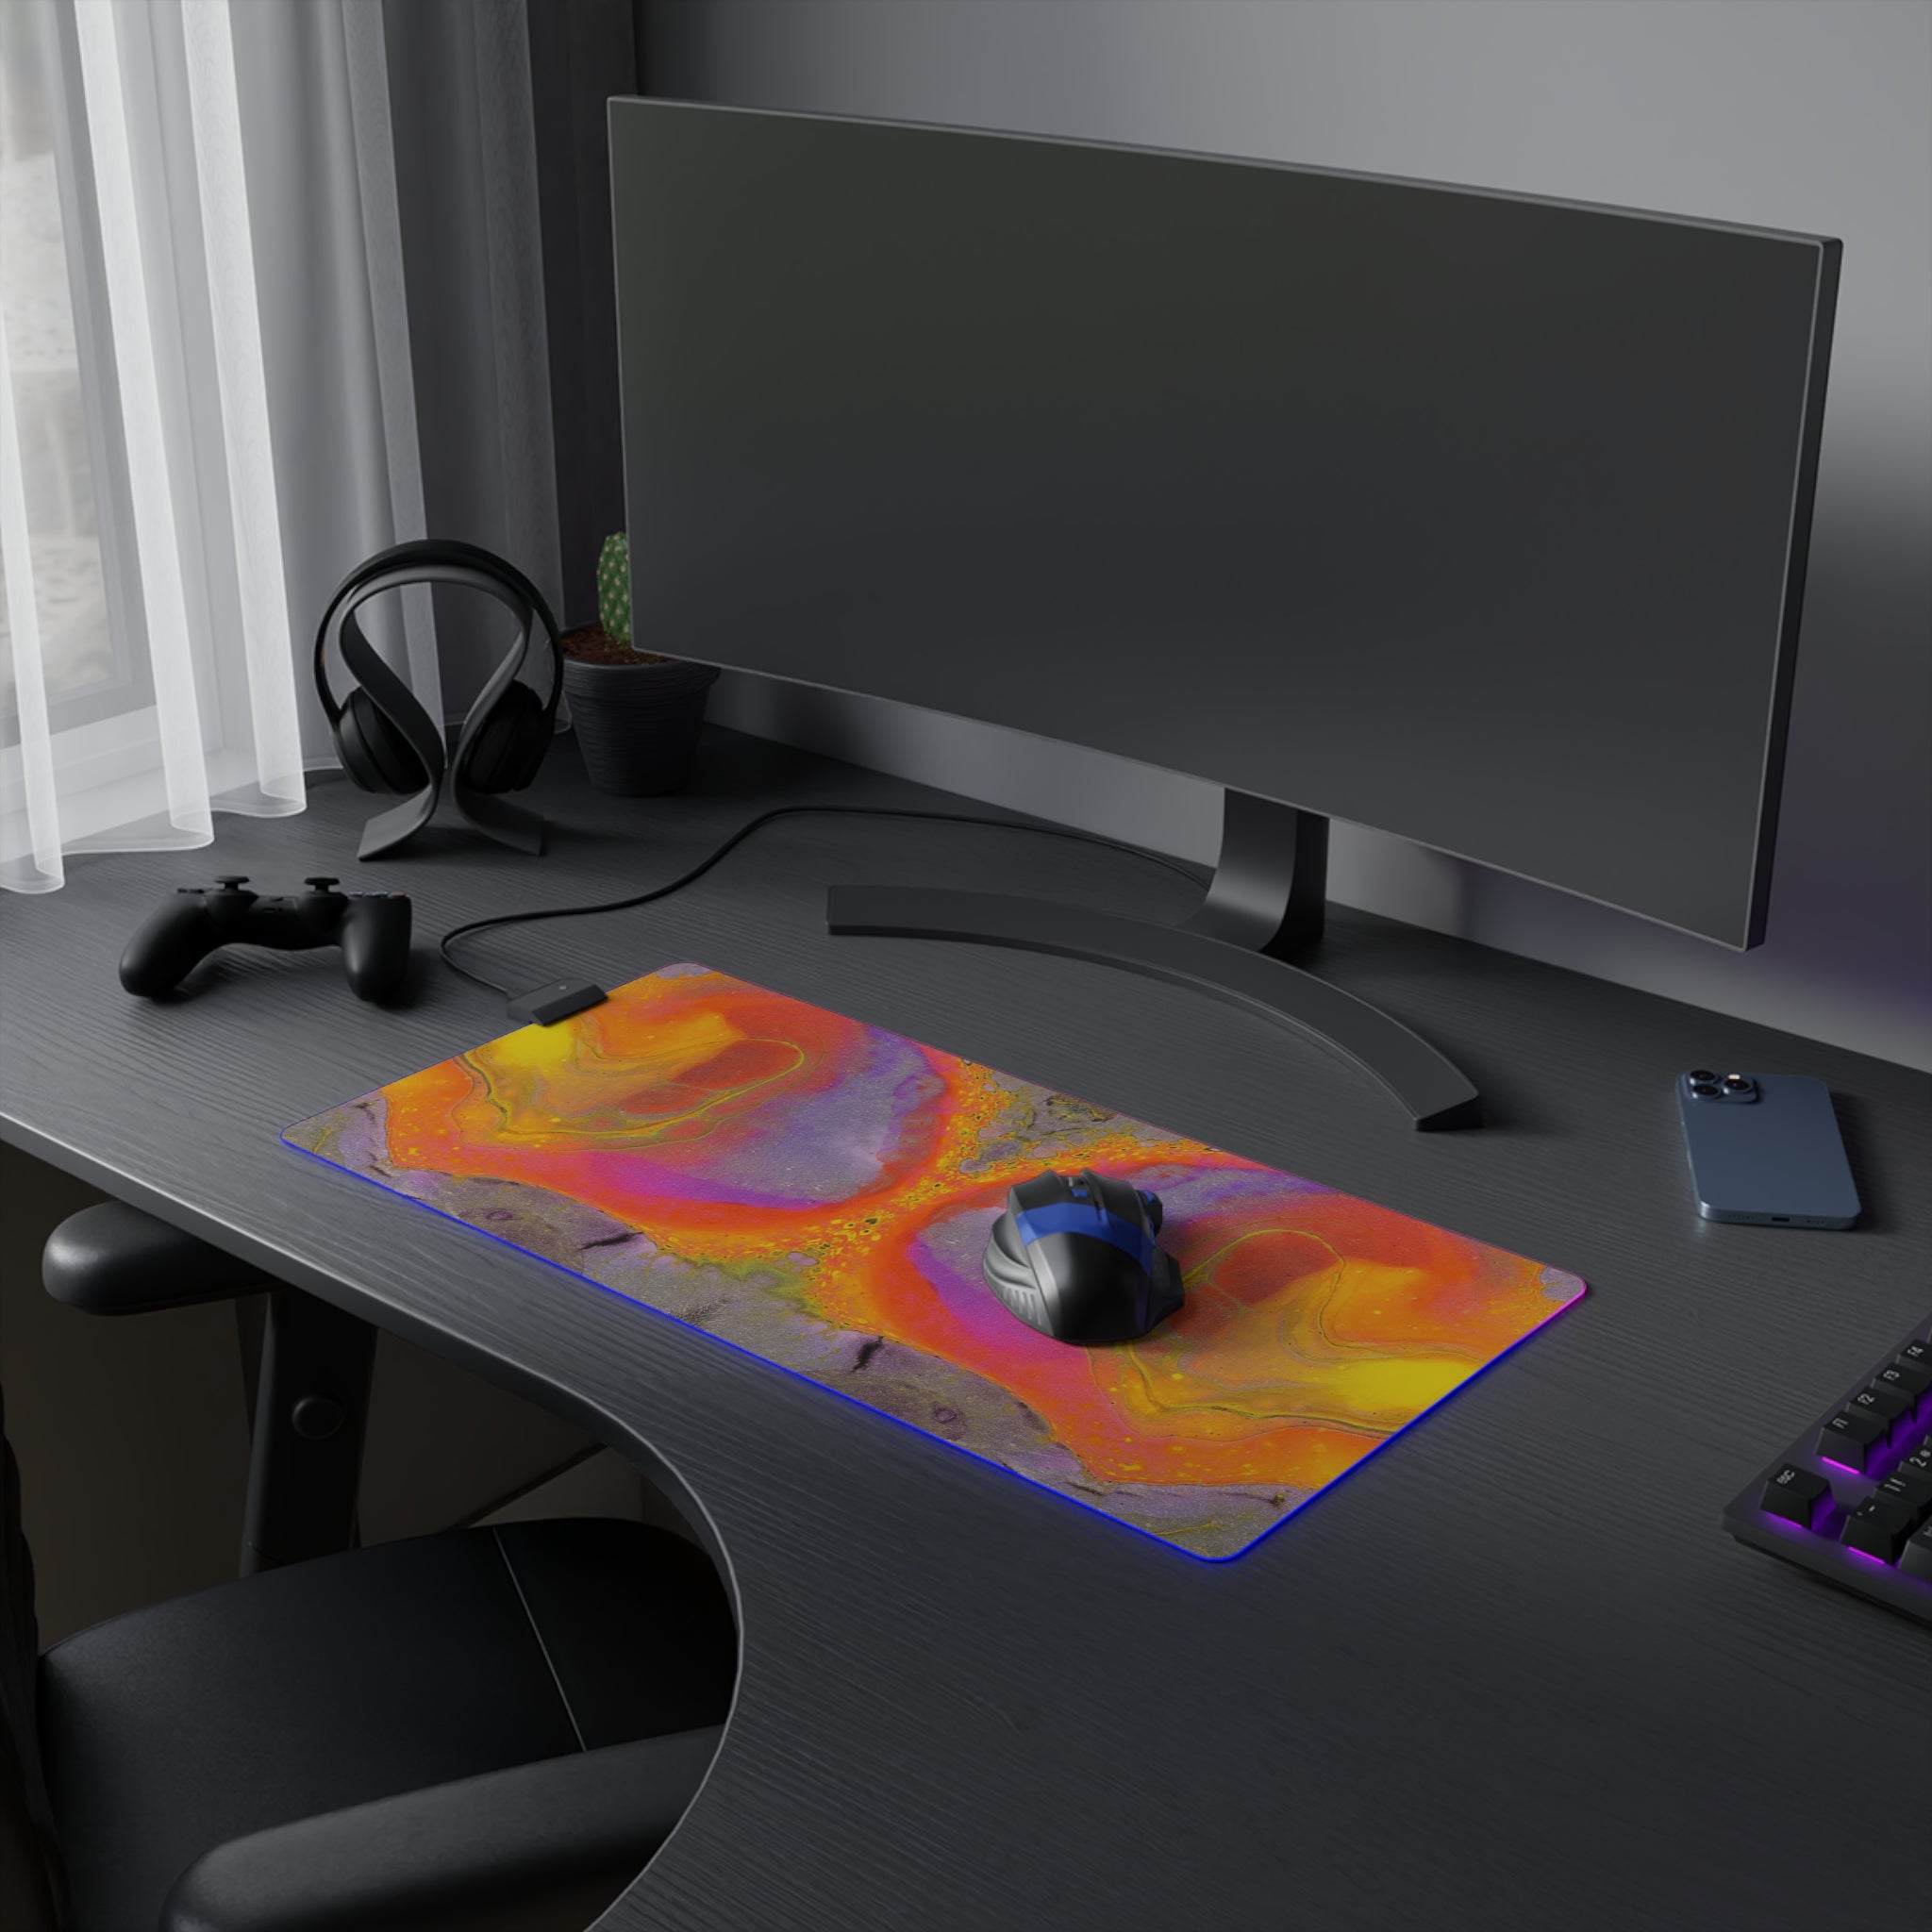 Smooth Moves - LED Gaming Mouse Pad